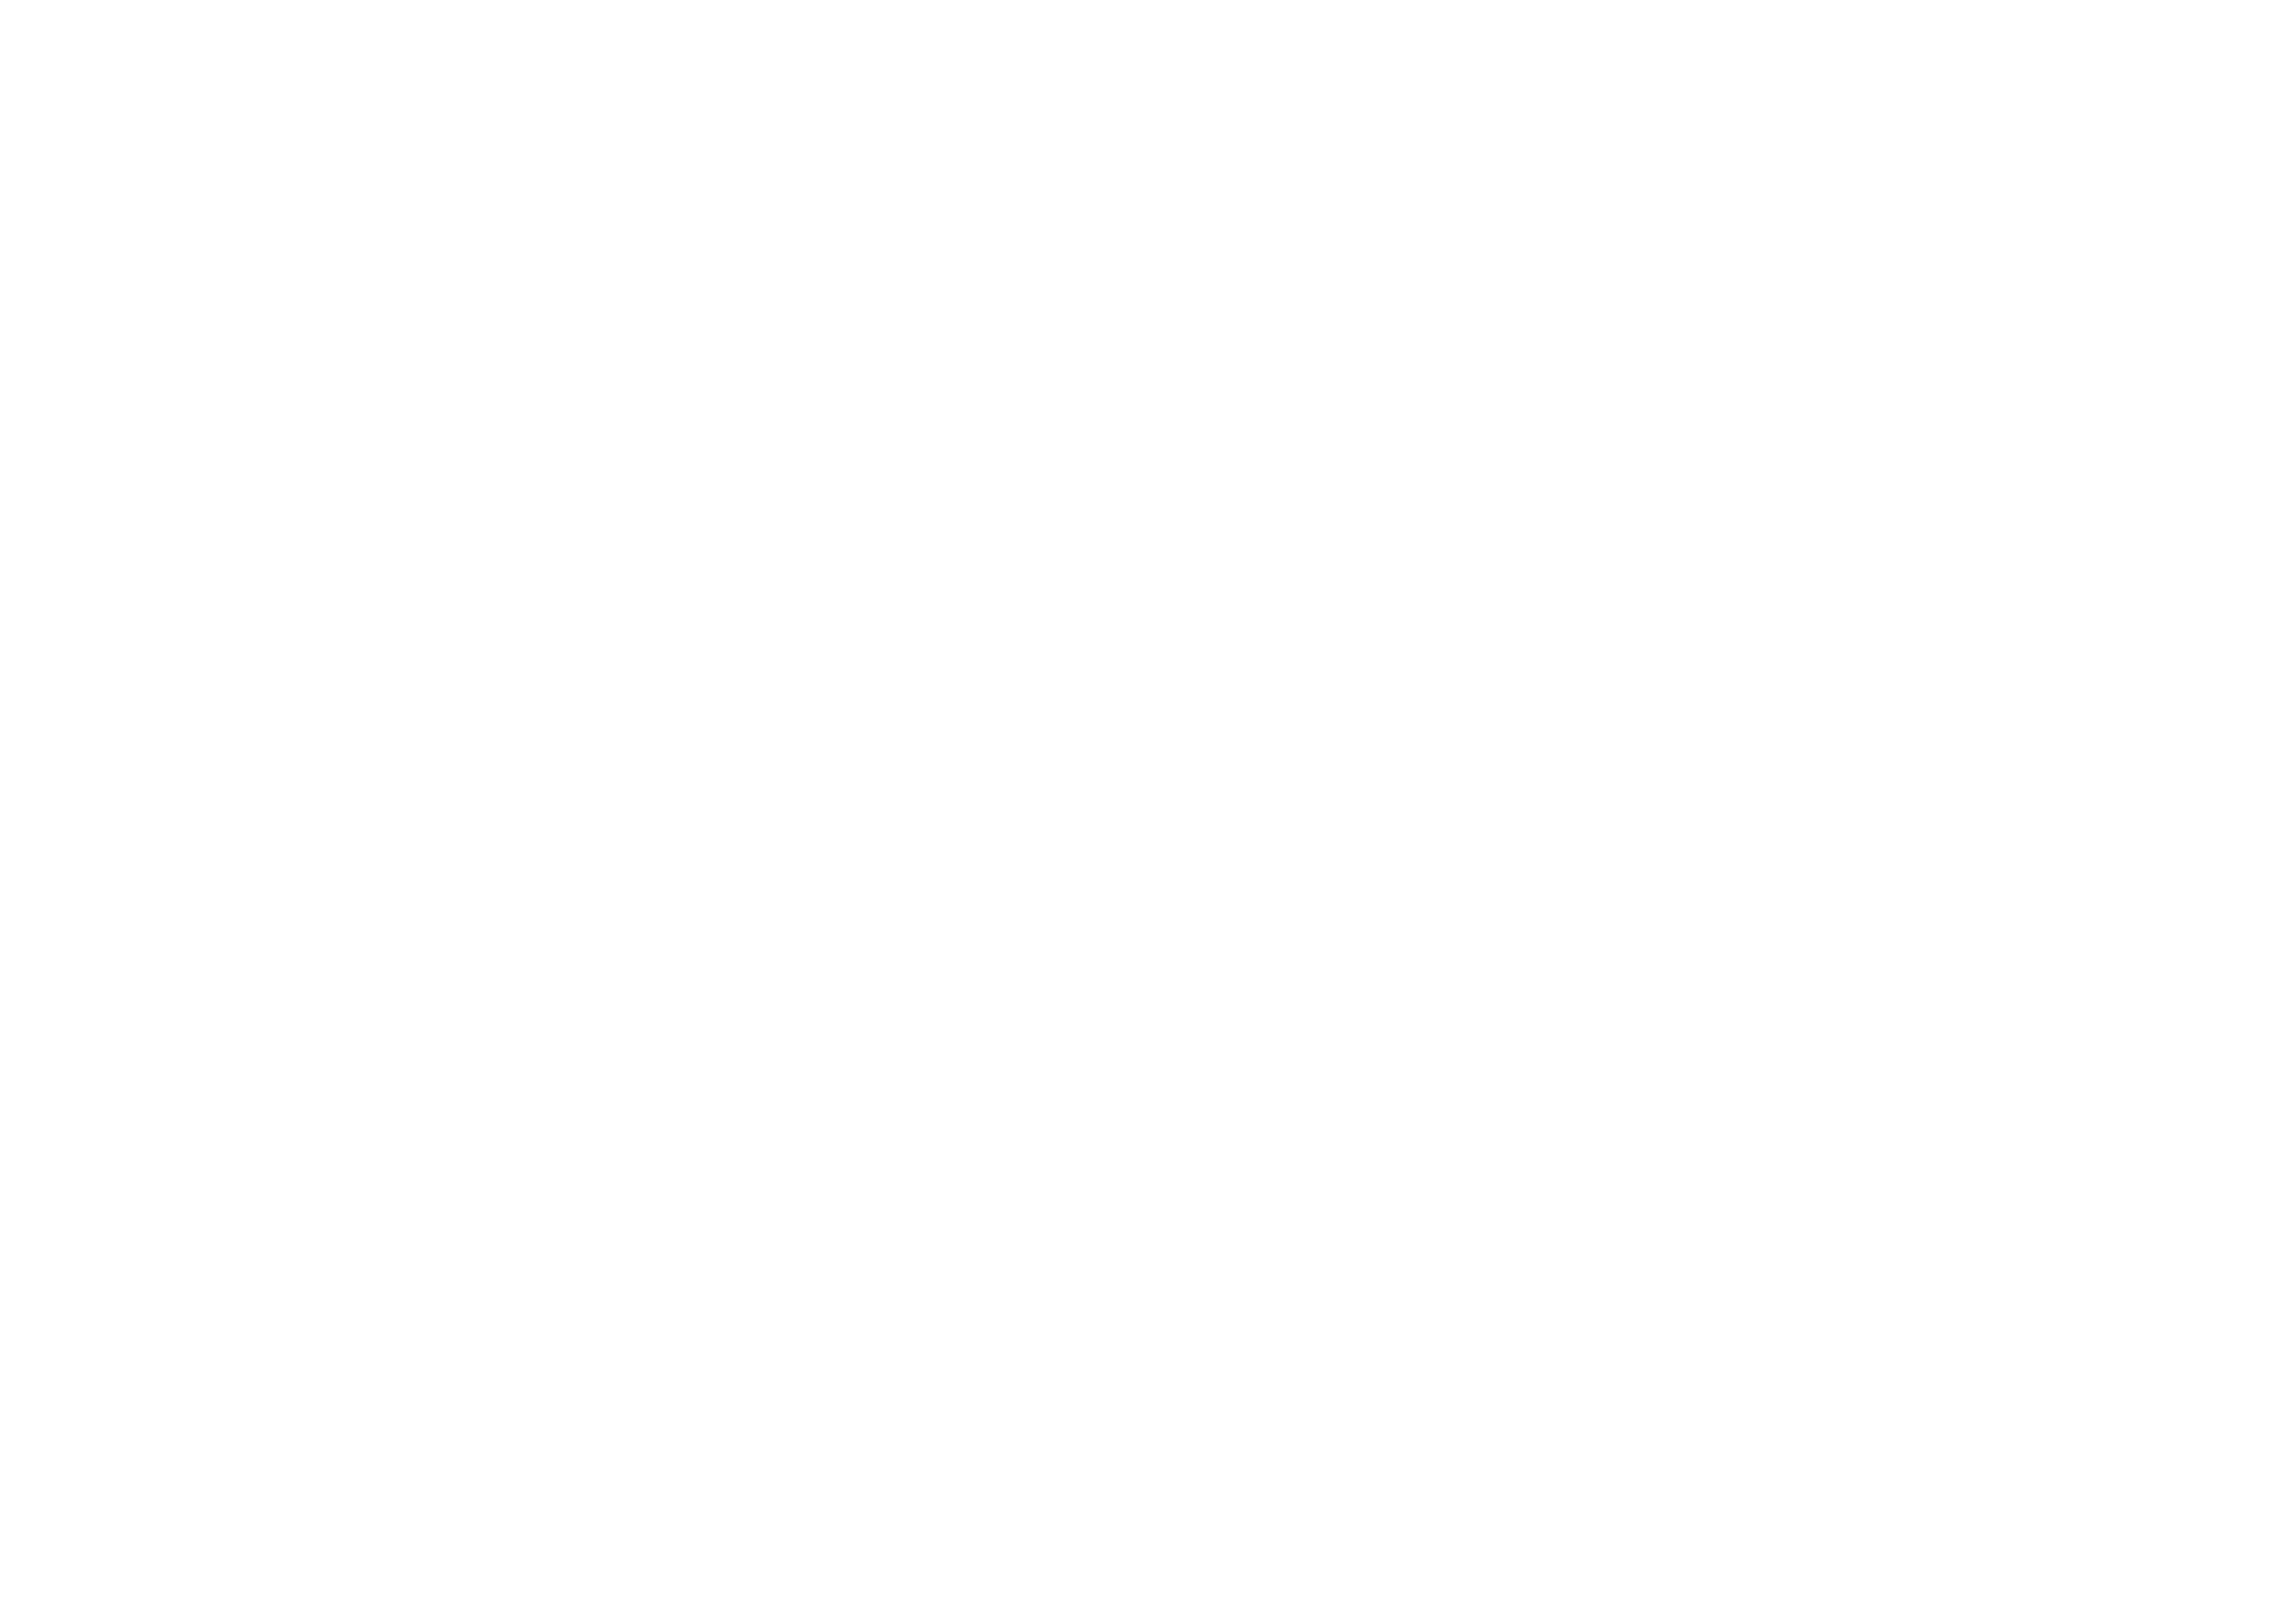 MAYBELLINE-01